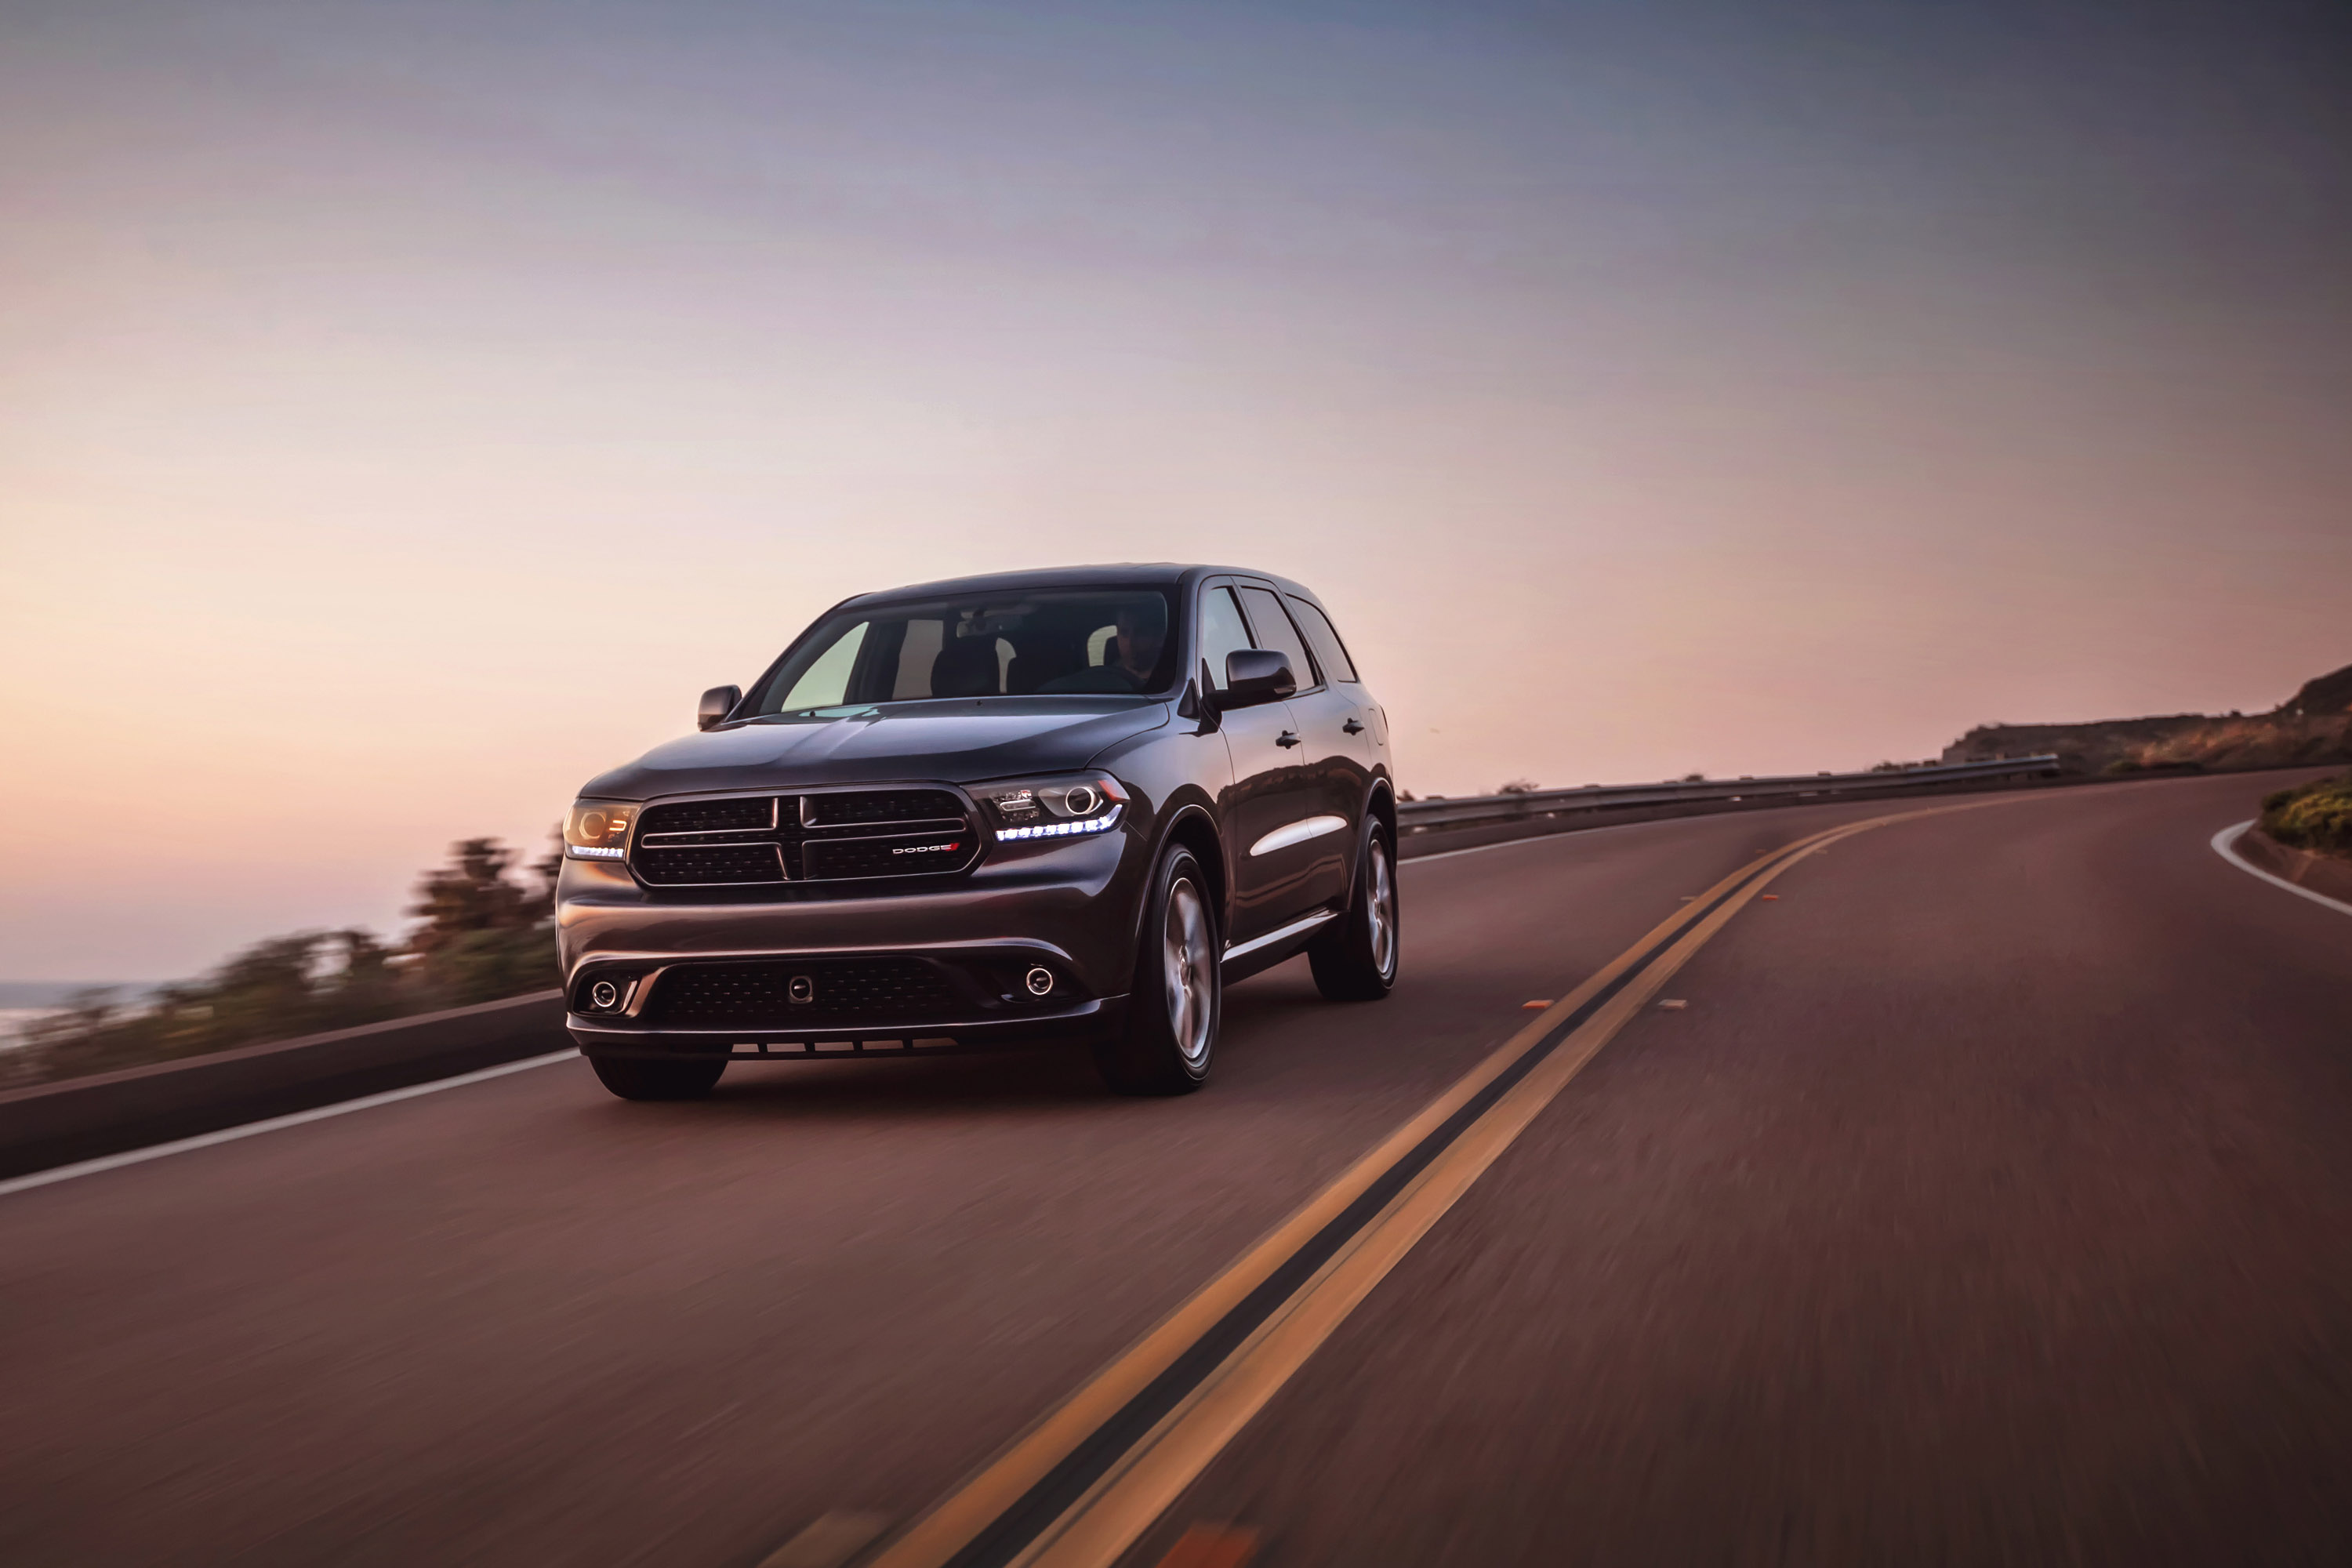 Dodge Durango Wallpapers and Background Images stmednet